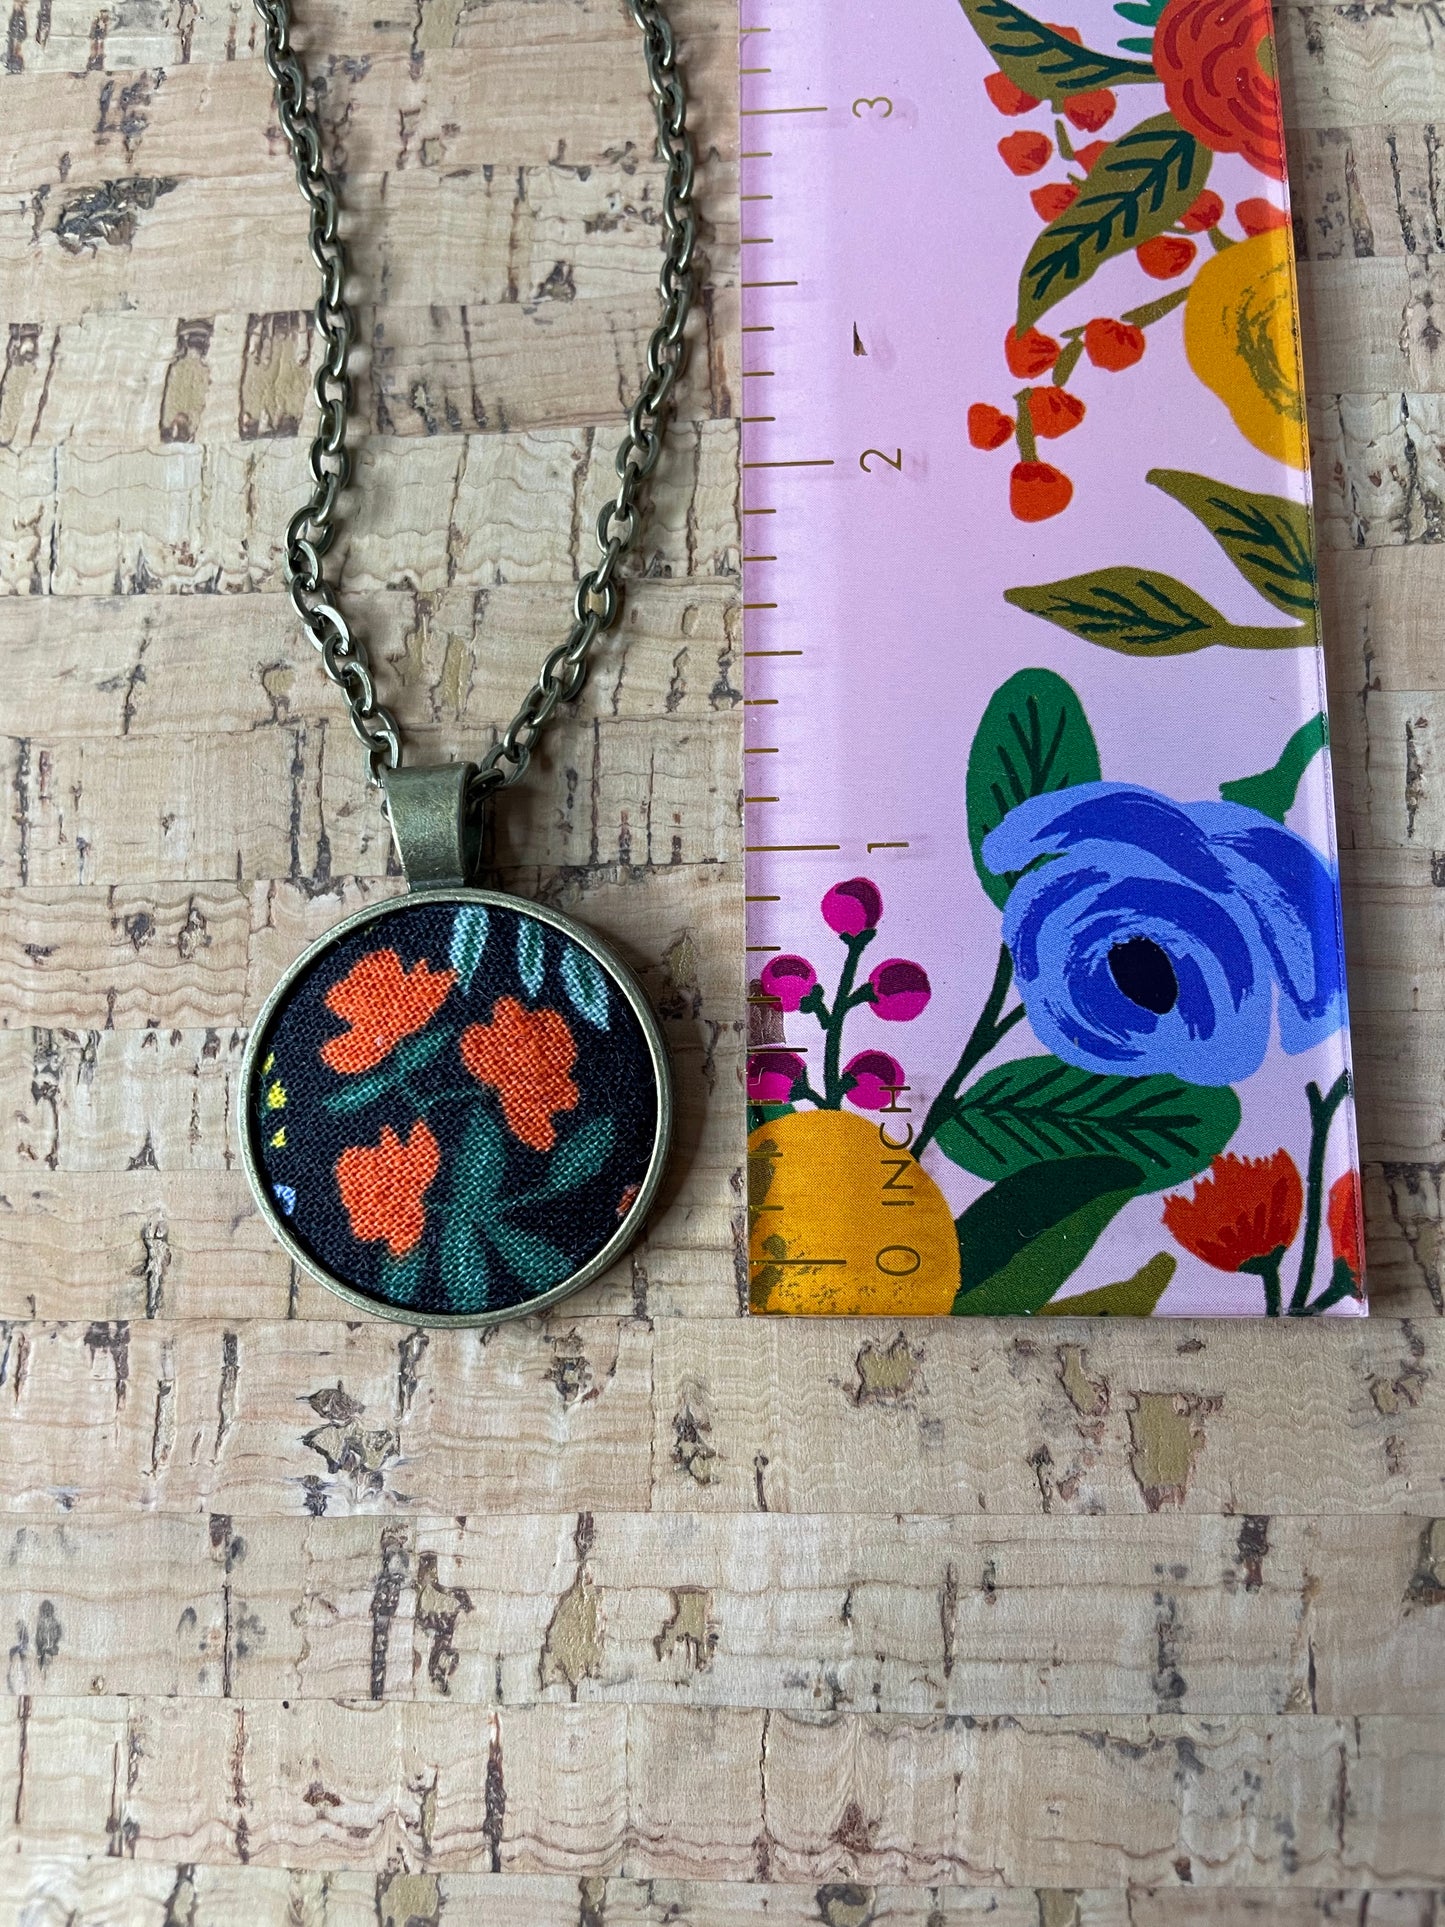 3 small red roses by Rifle Paper co necklace